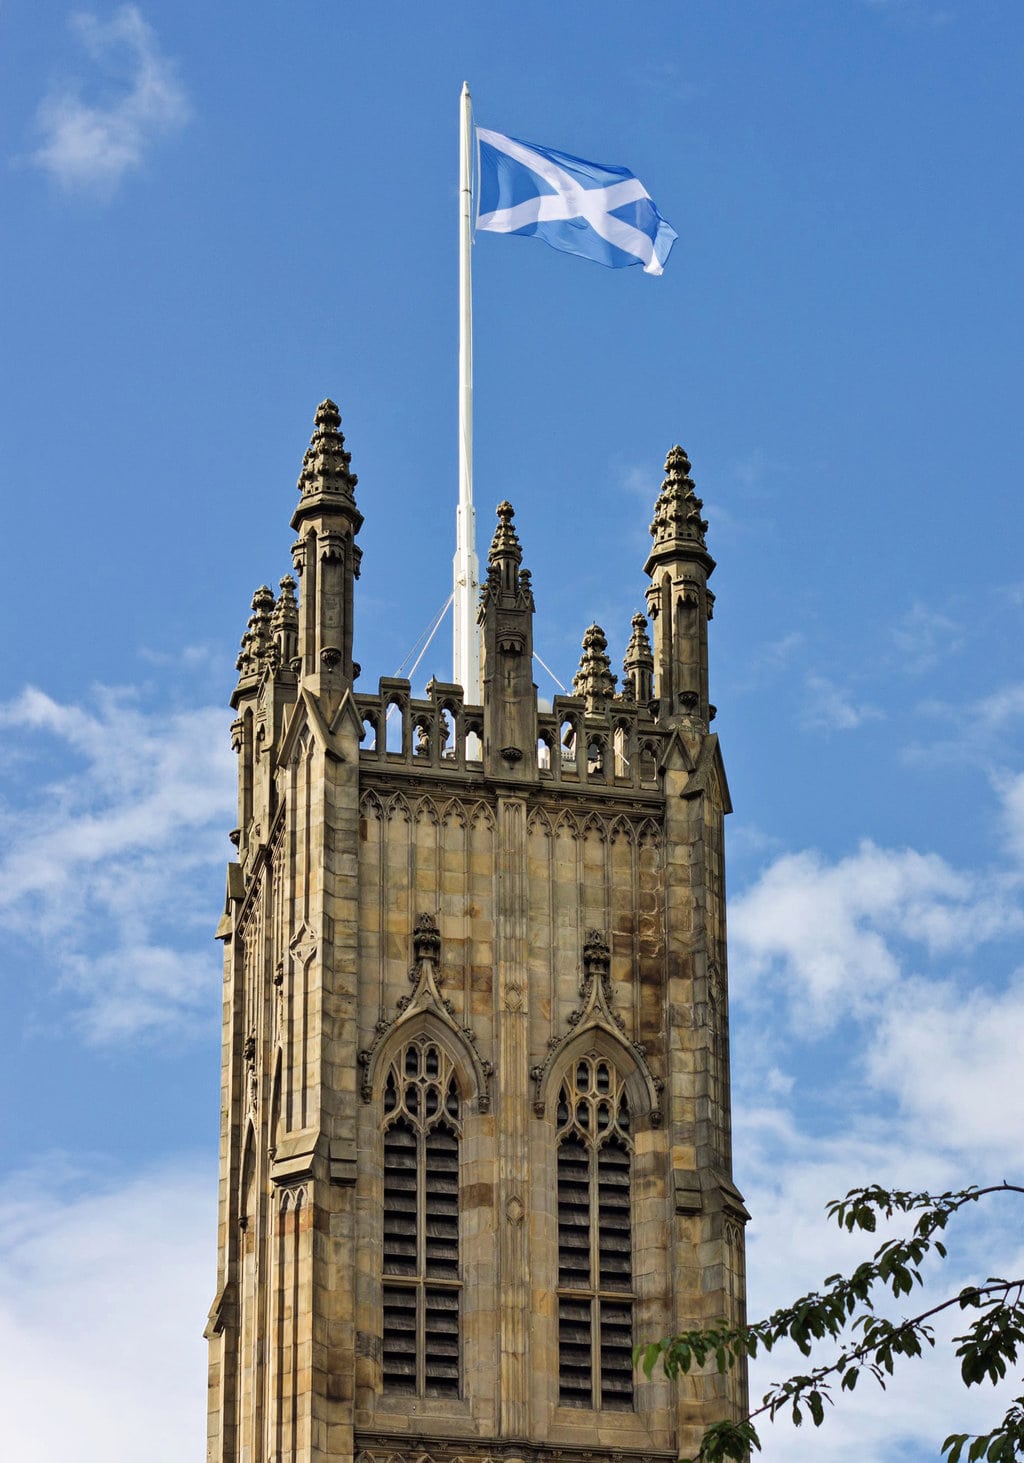 The Saltire Flag Flying on Top of a Medieval Tower in Edinburgh